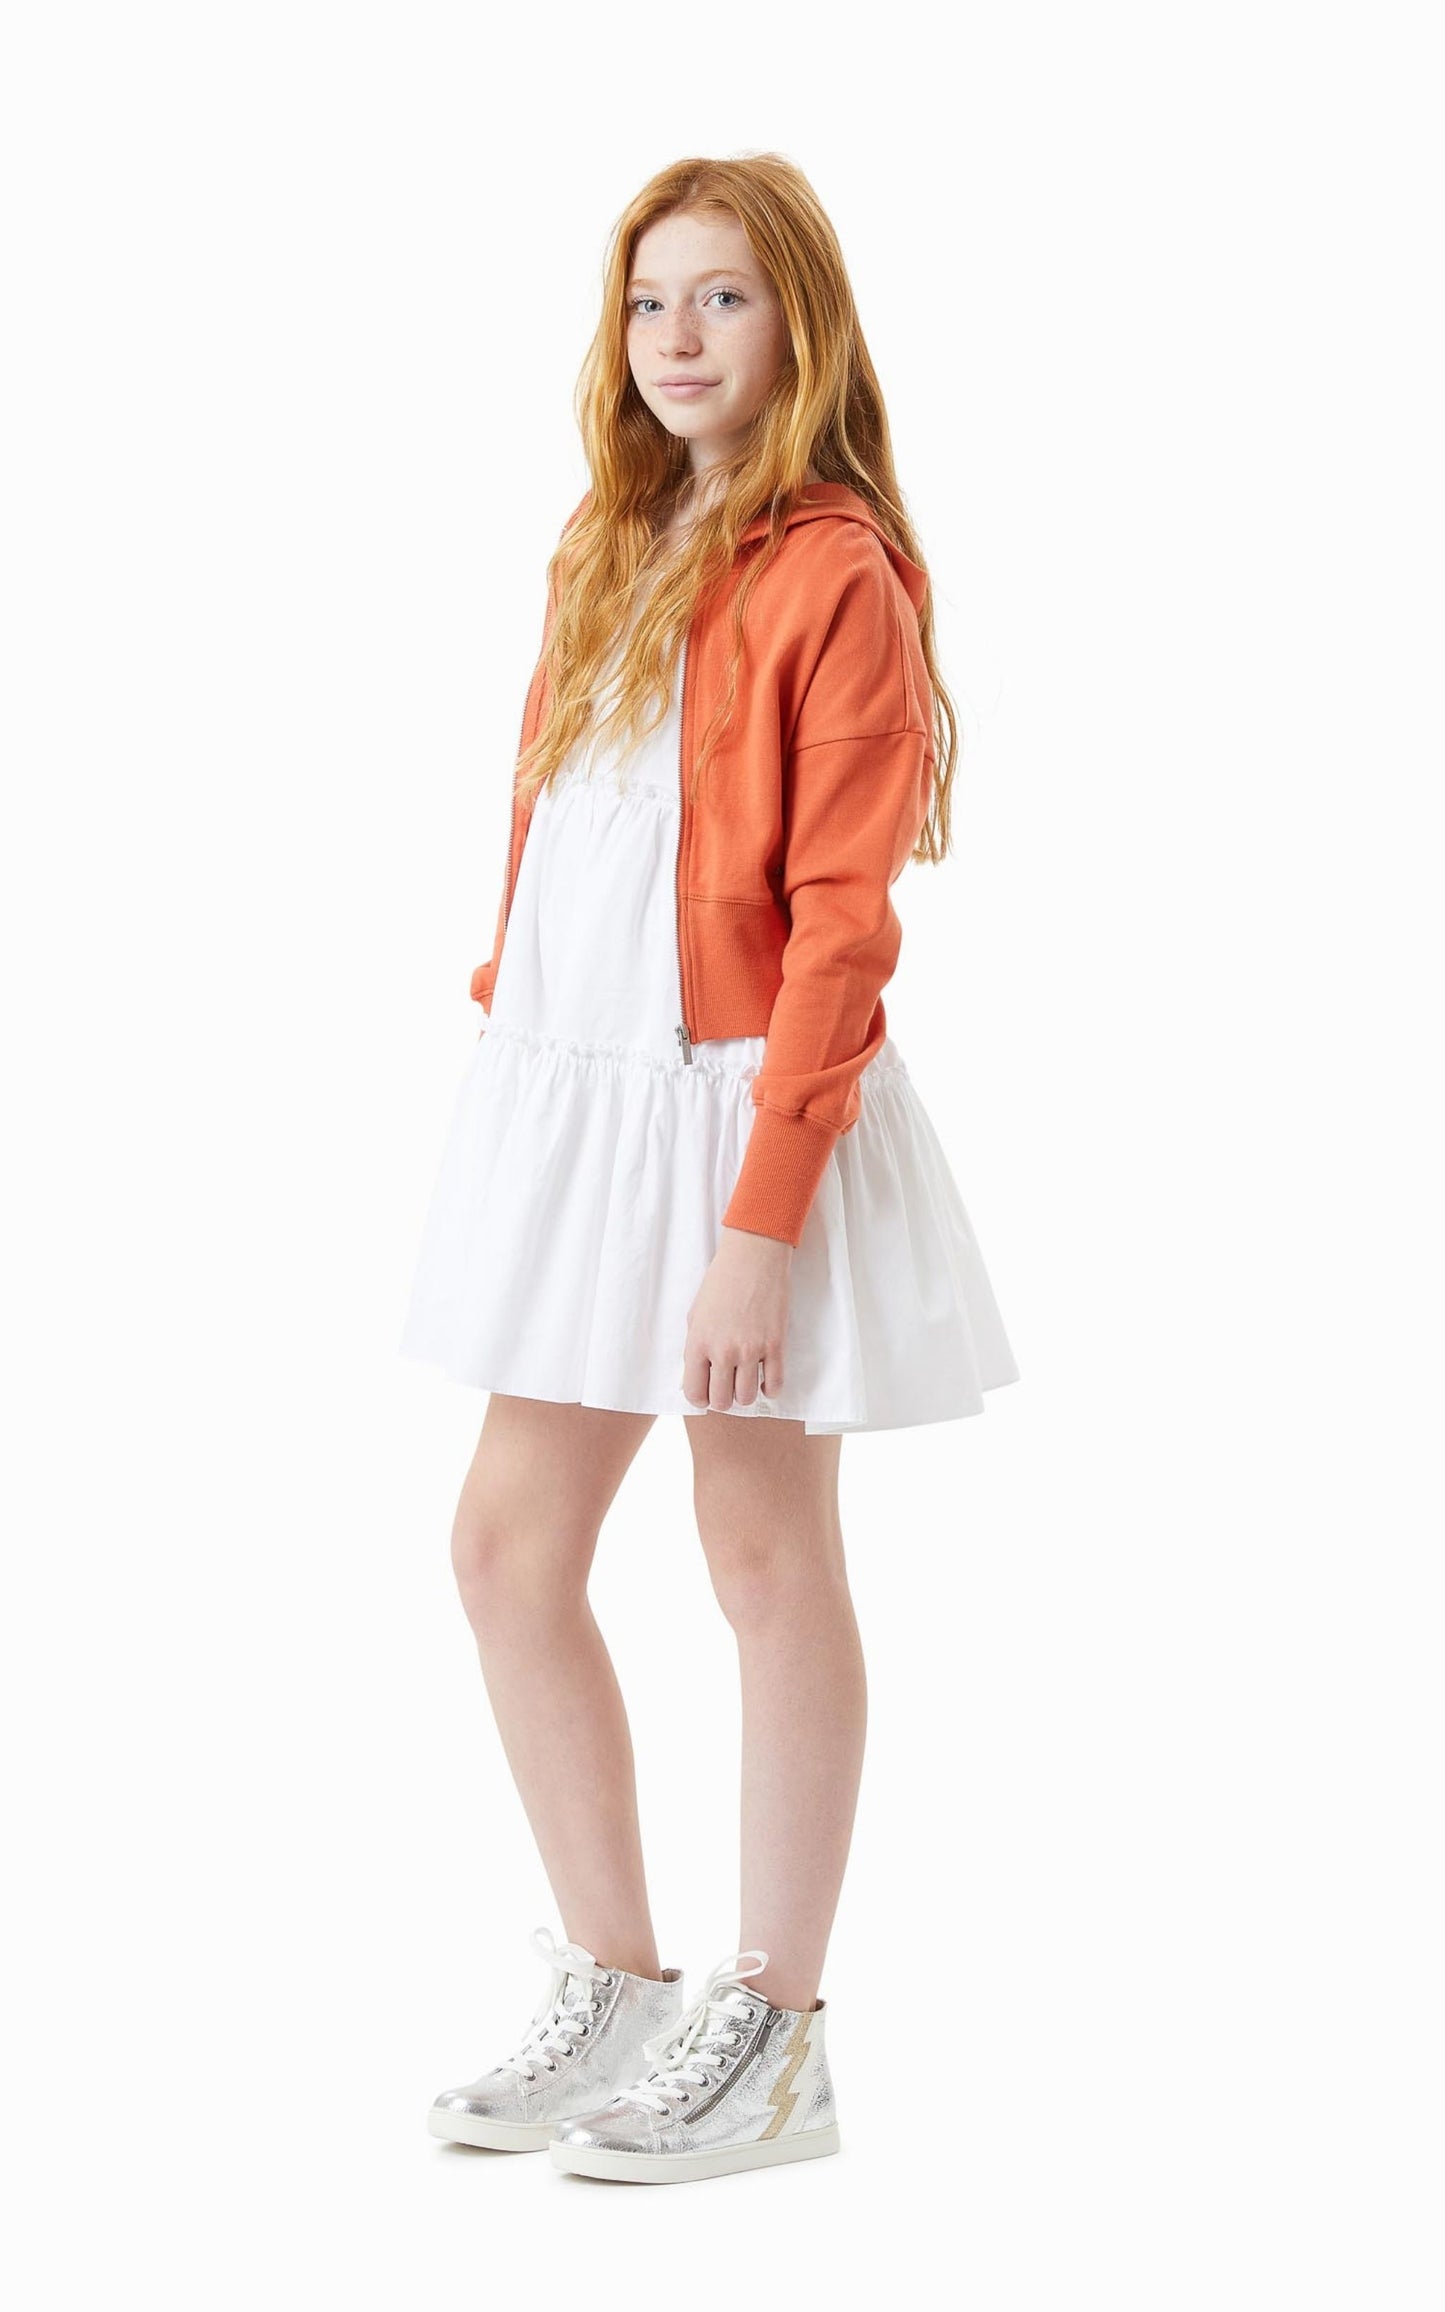 Side View Pre-teen Child in a White Mid-Thigh Summer Dress and Orange Zip up hoodie 